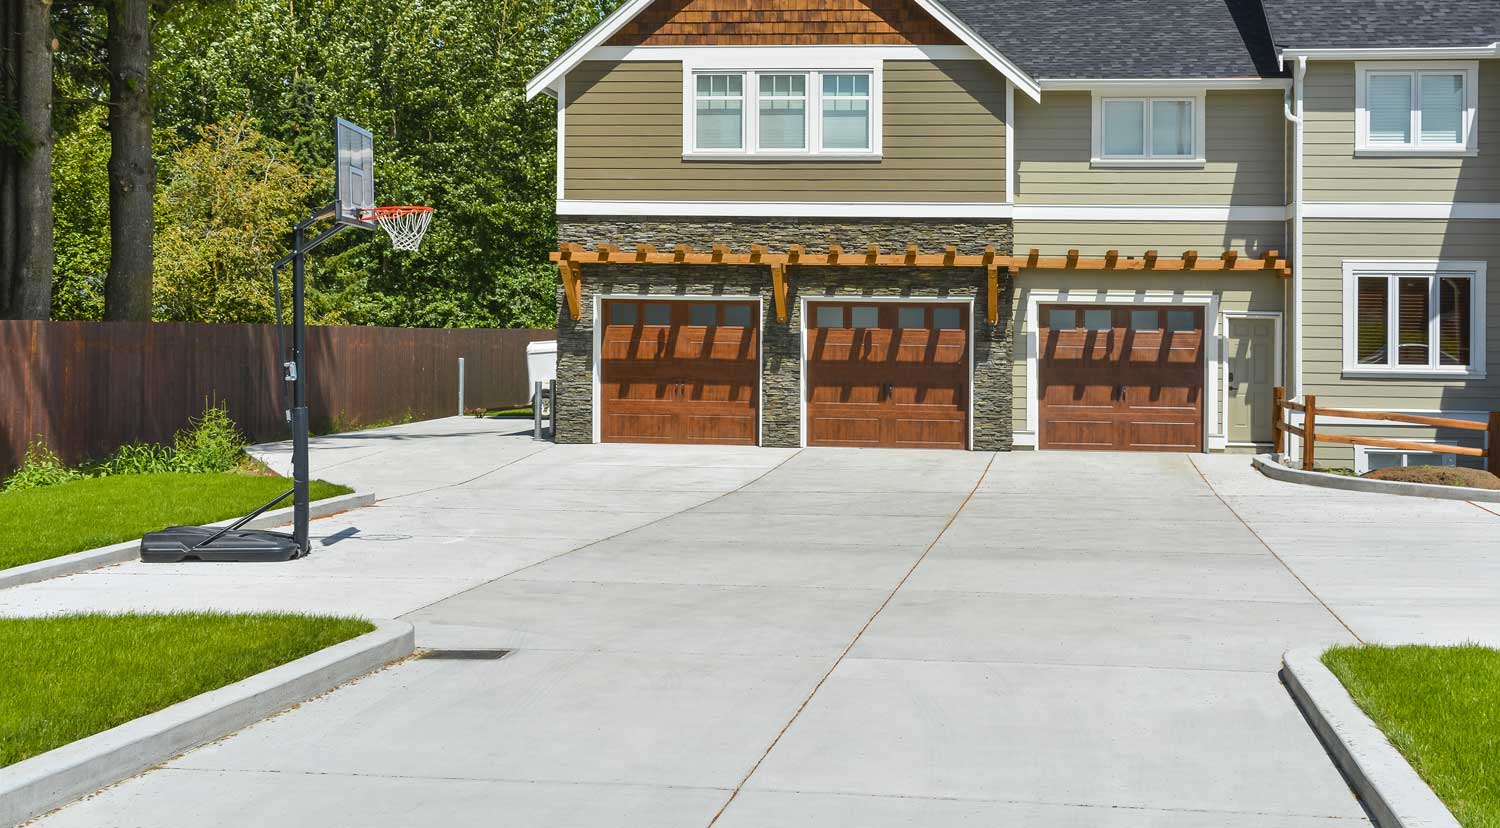 New concrete driveway in front of a home